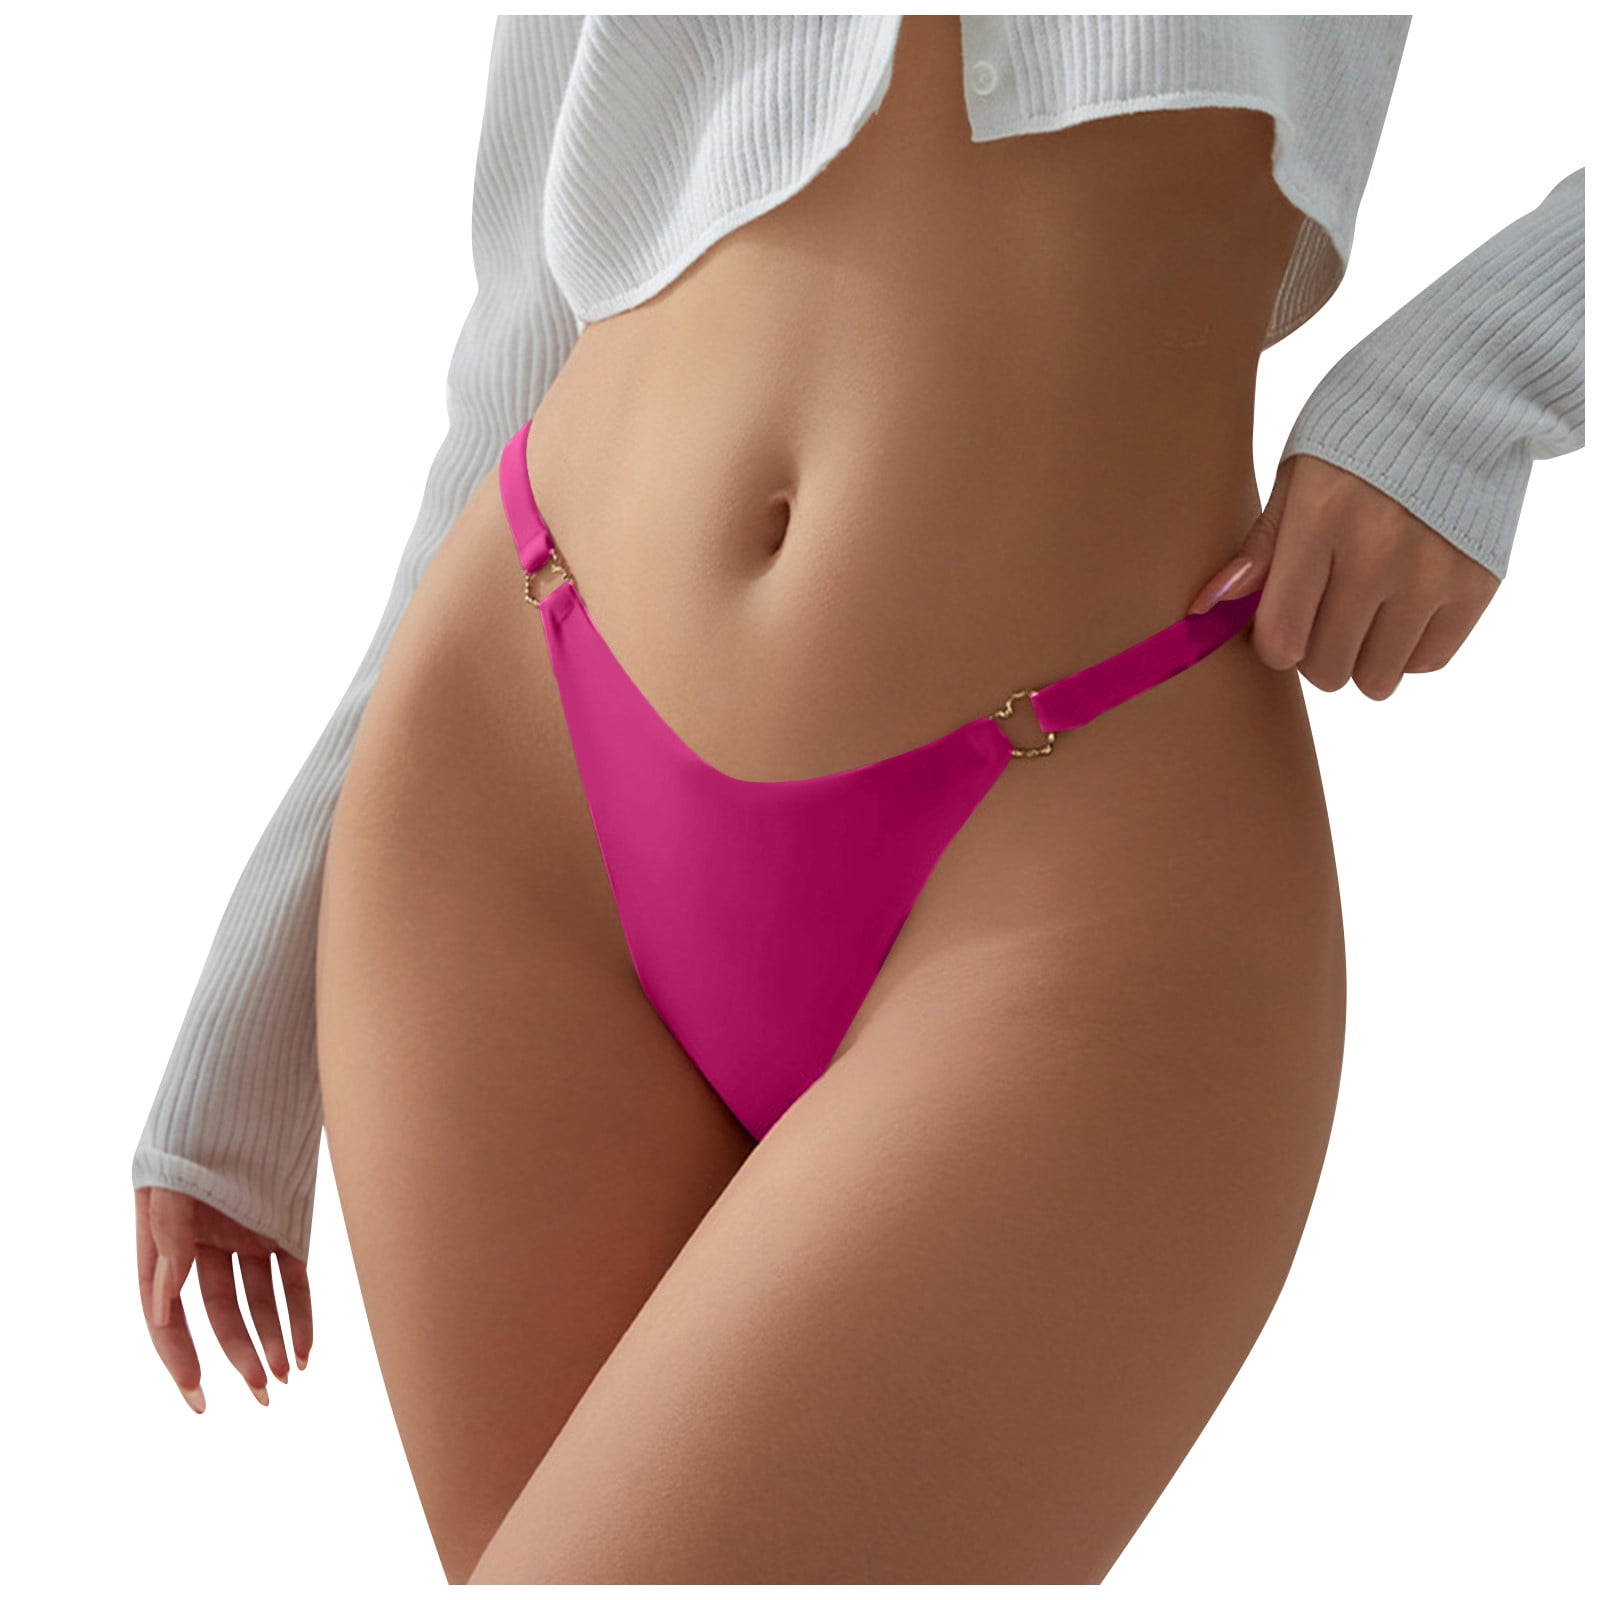 Qcmgmg Women Underwear on Clearance Soft Low Rise G String Thong Sexy No  Show String Panties for Women Plus Size Hot Pink XL